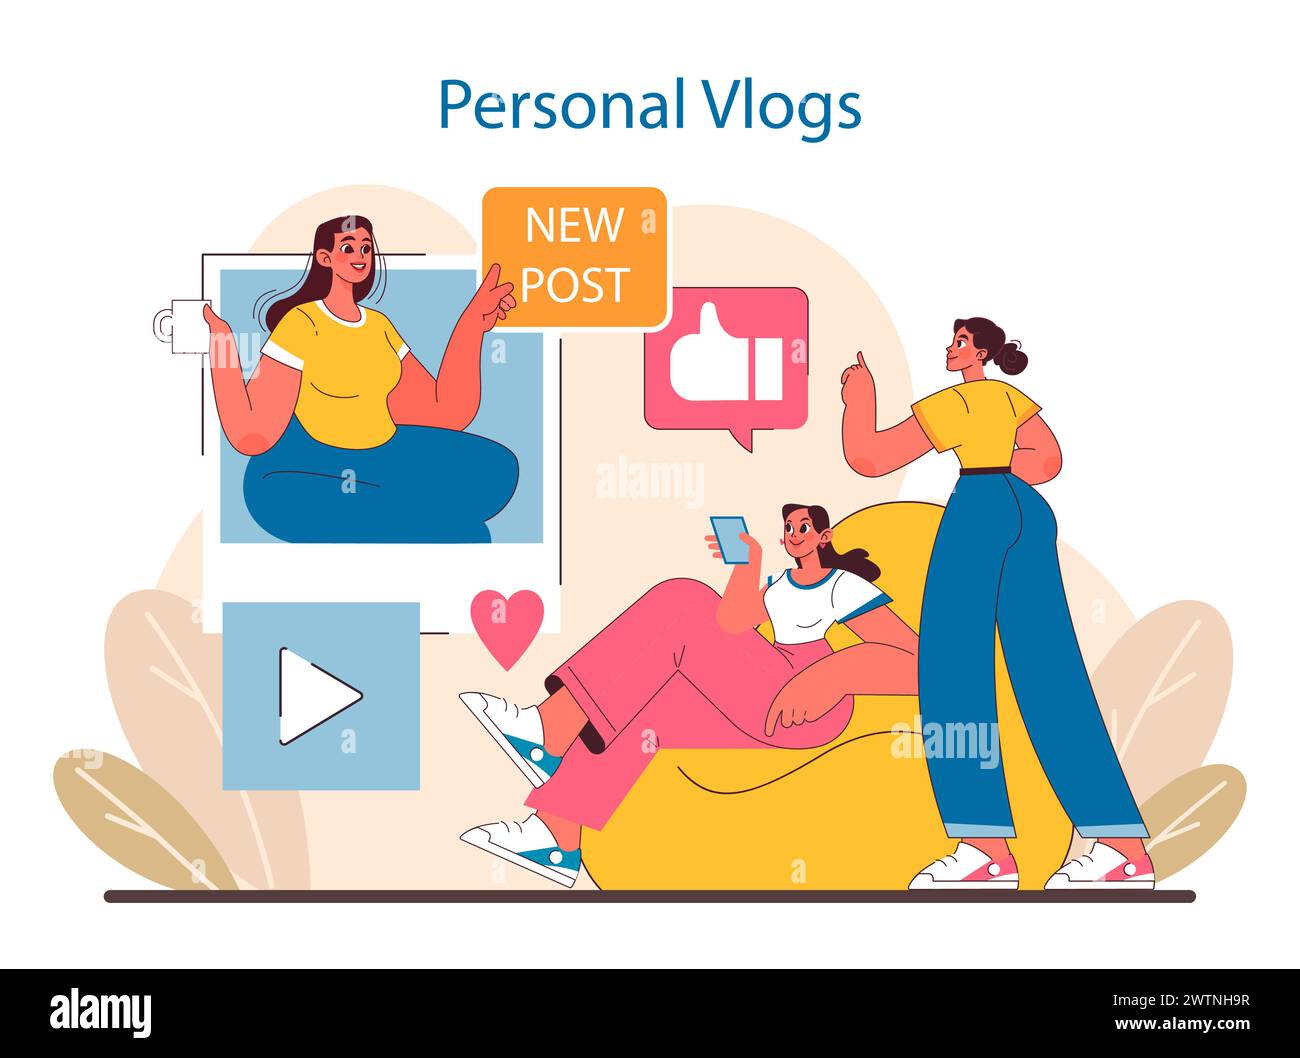 Personal Vlogs concept. Authentic daily life insights shared on digital platforms. Influencers connecting with followers. Interactive social media storytelling. Flat vector illustration. Stock Vector